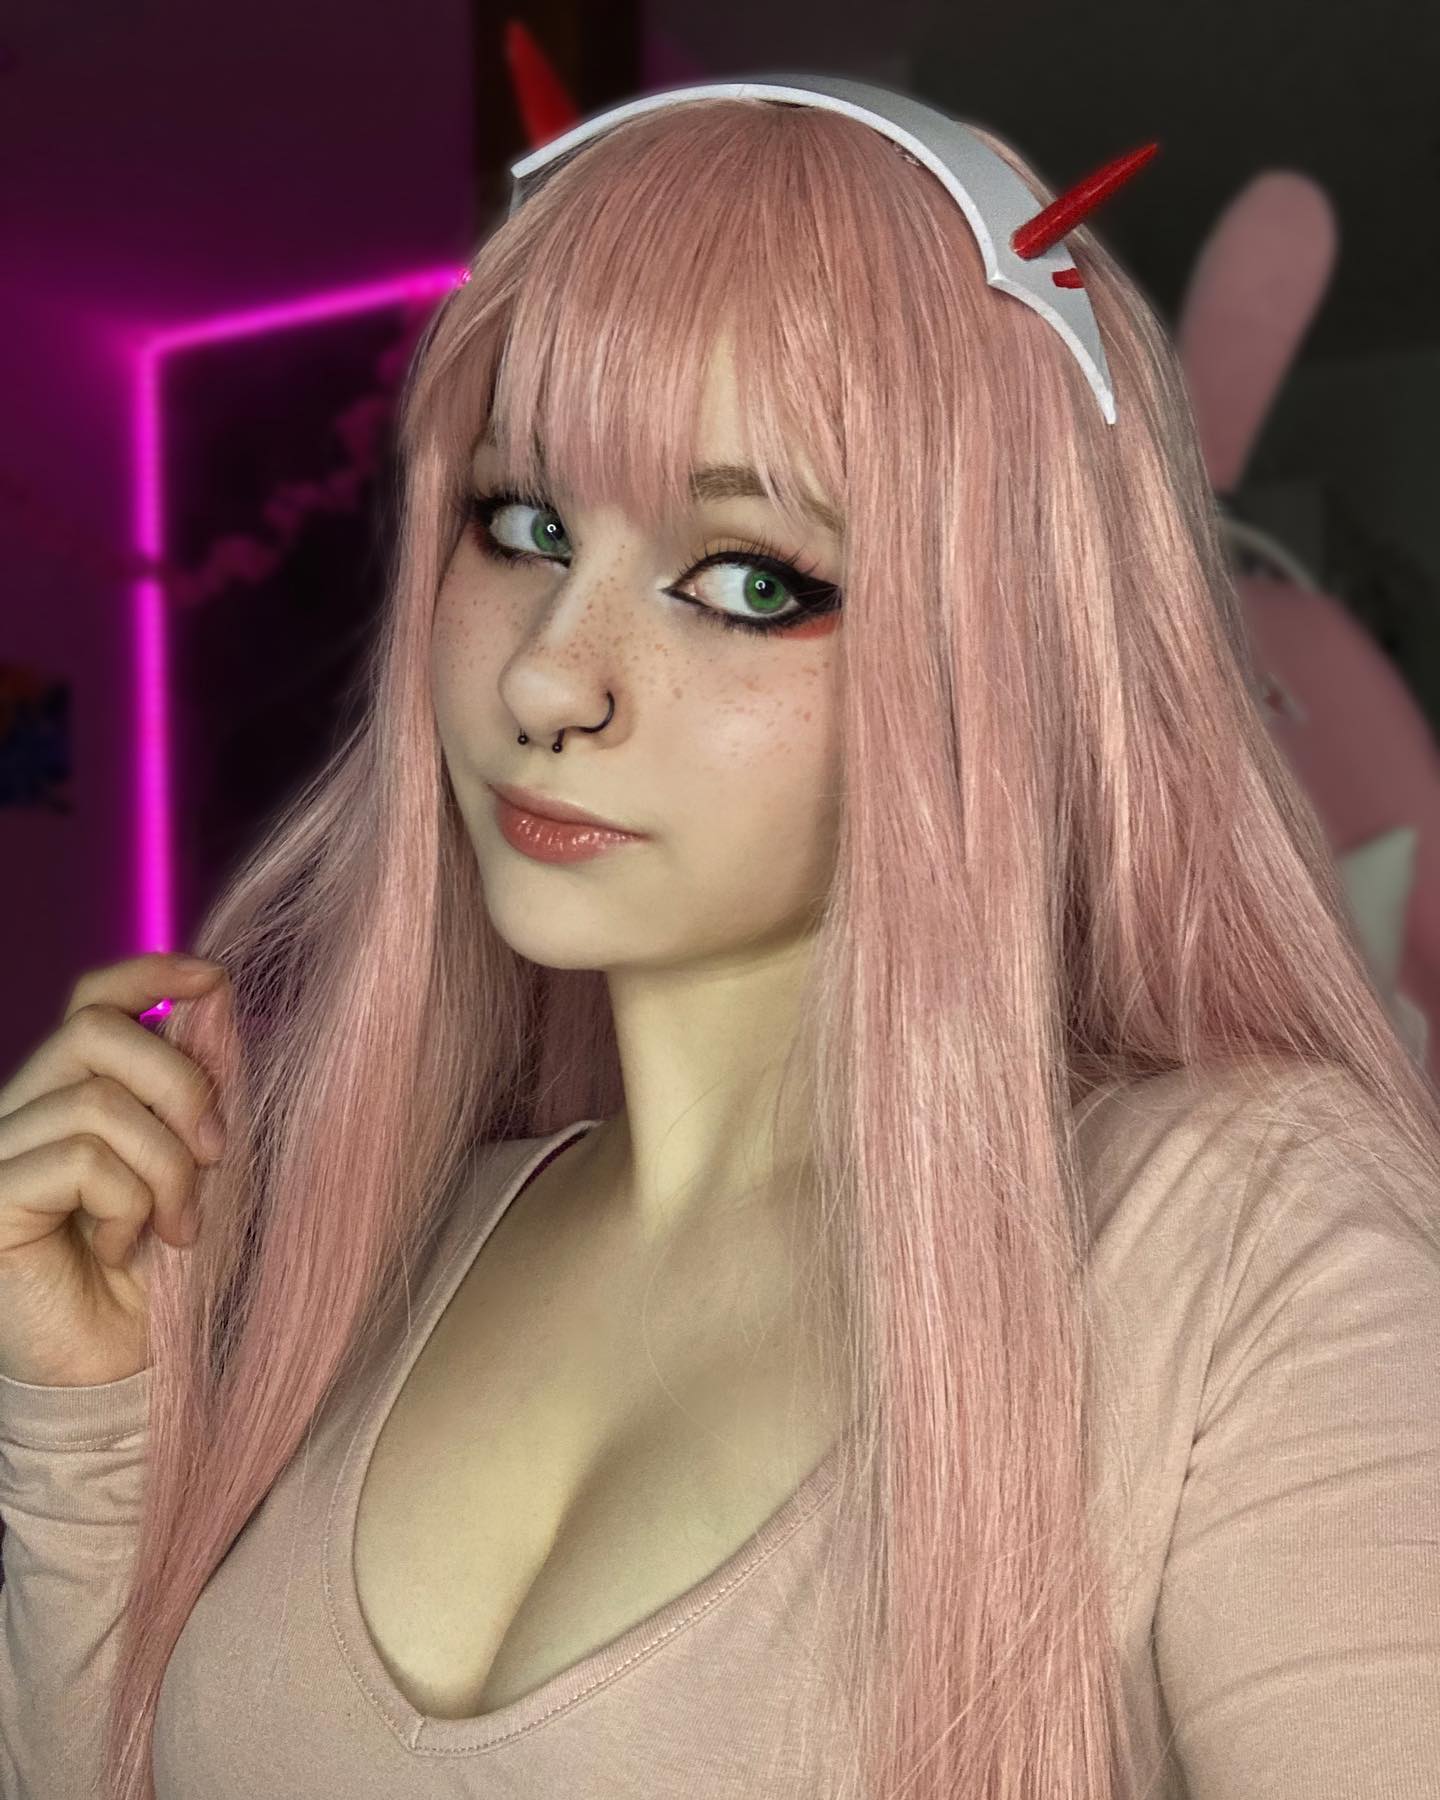 back to the roots with my zerotwo cosplay !! 🌸 im also making tiktoks again finally 😔💖 didnt have motivation for soo long because of the ban haha
-
anyways how are u guys doing ??? :3
-
tags!
#cosplay #cosplayer #cosplaygirl #cosplaying #zerotwo #zerotwocosplay #anime #animecosplay #darlinginthefranxx #darlinginthefranxxzerotwo #darlinginthefranxxcosplay #ditf